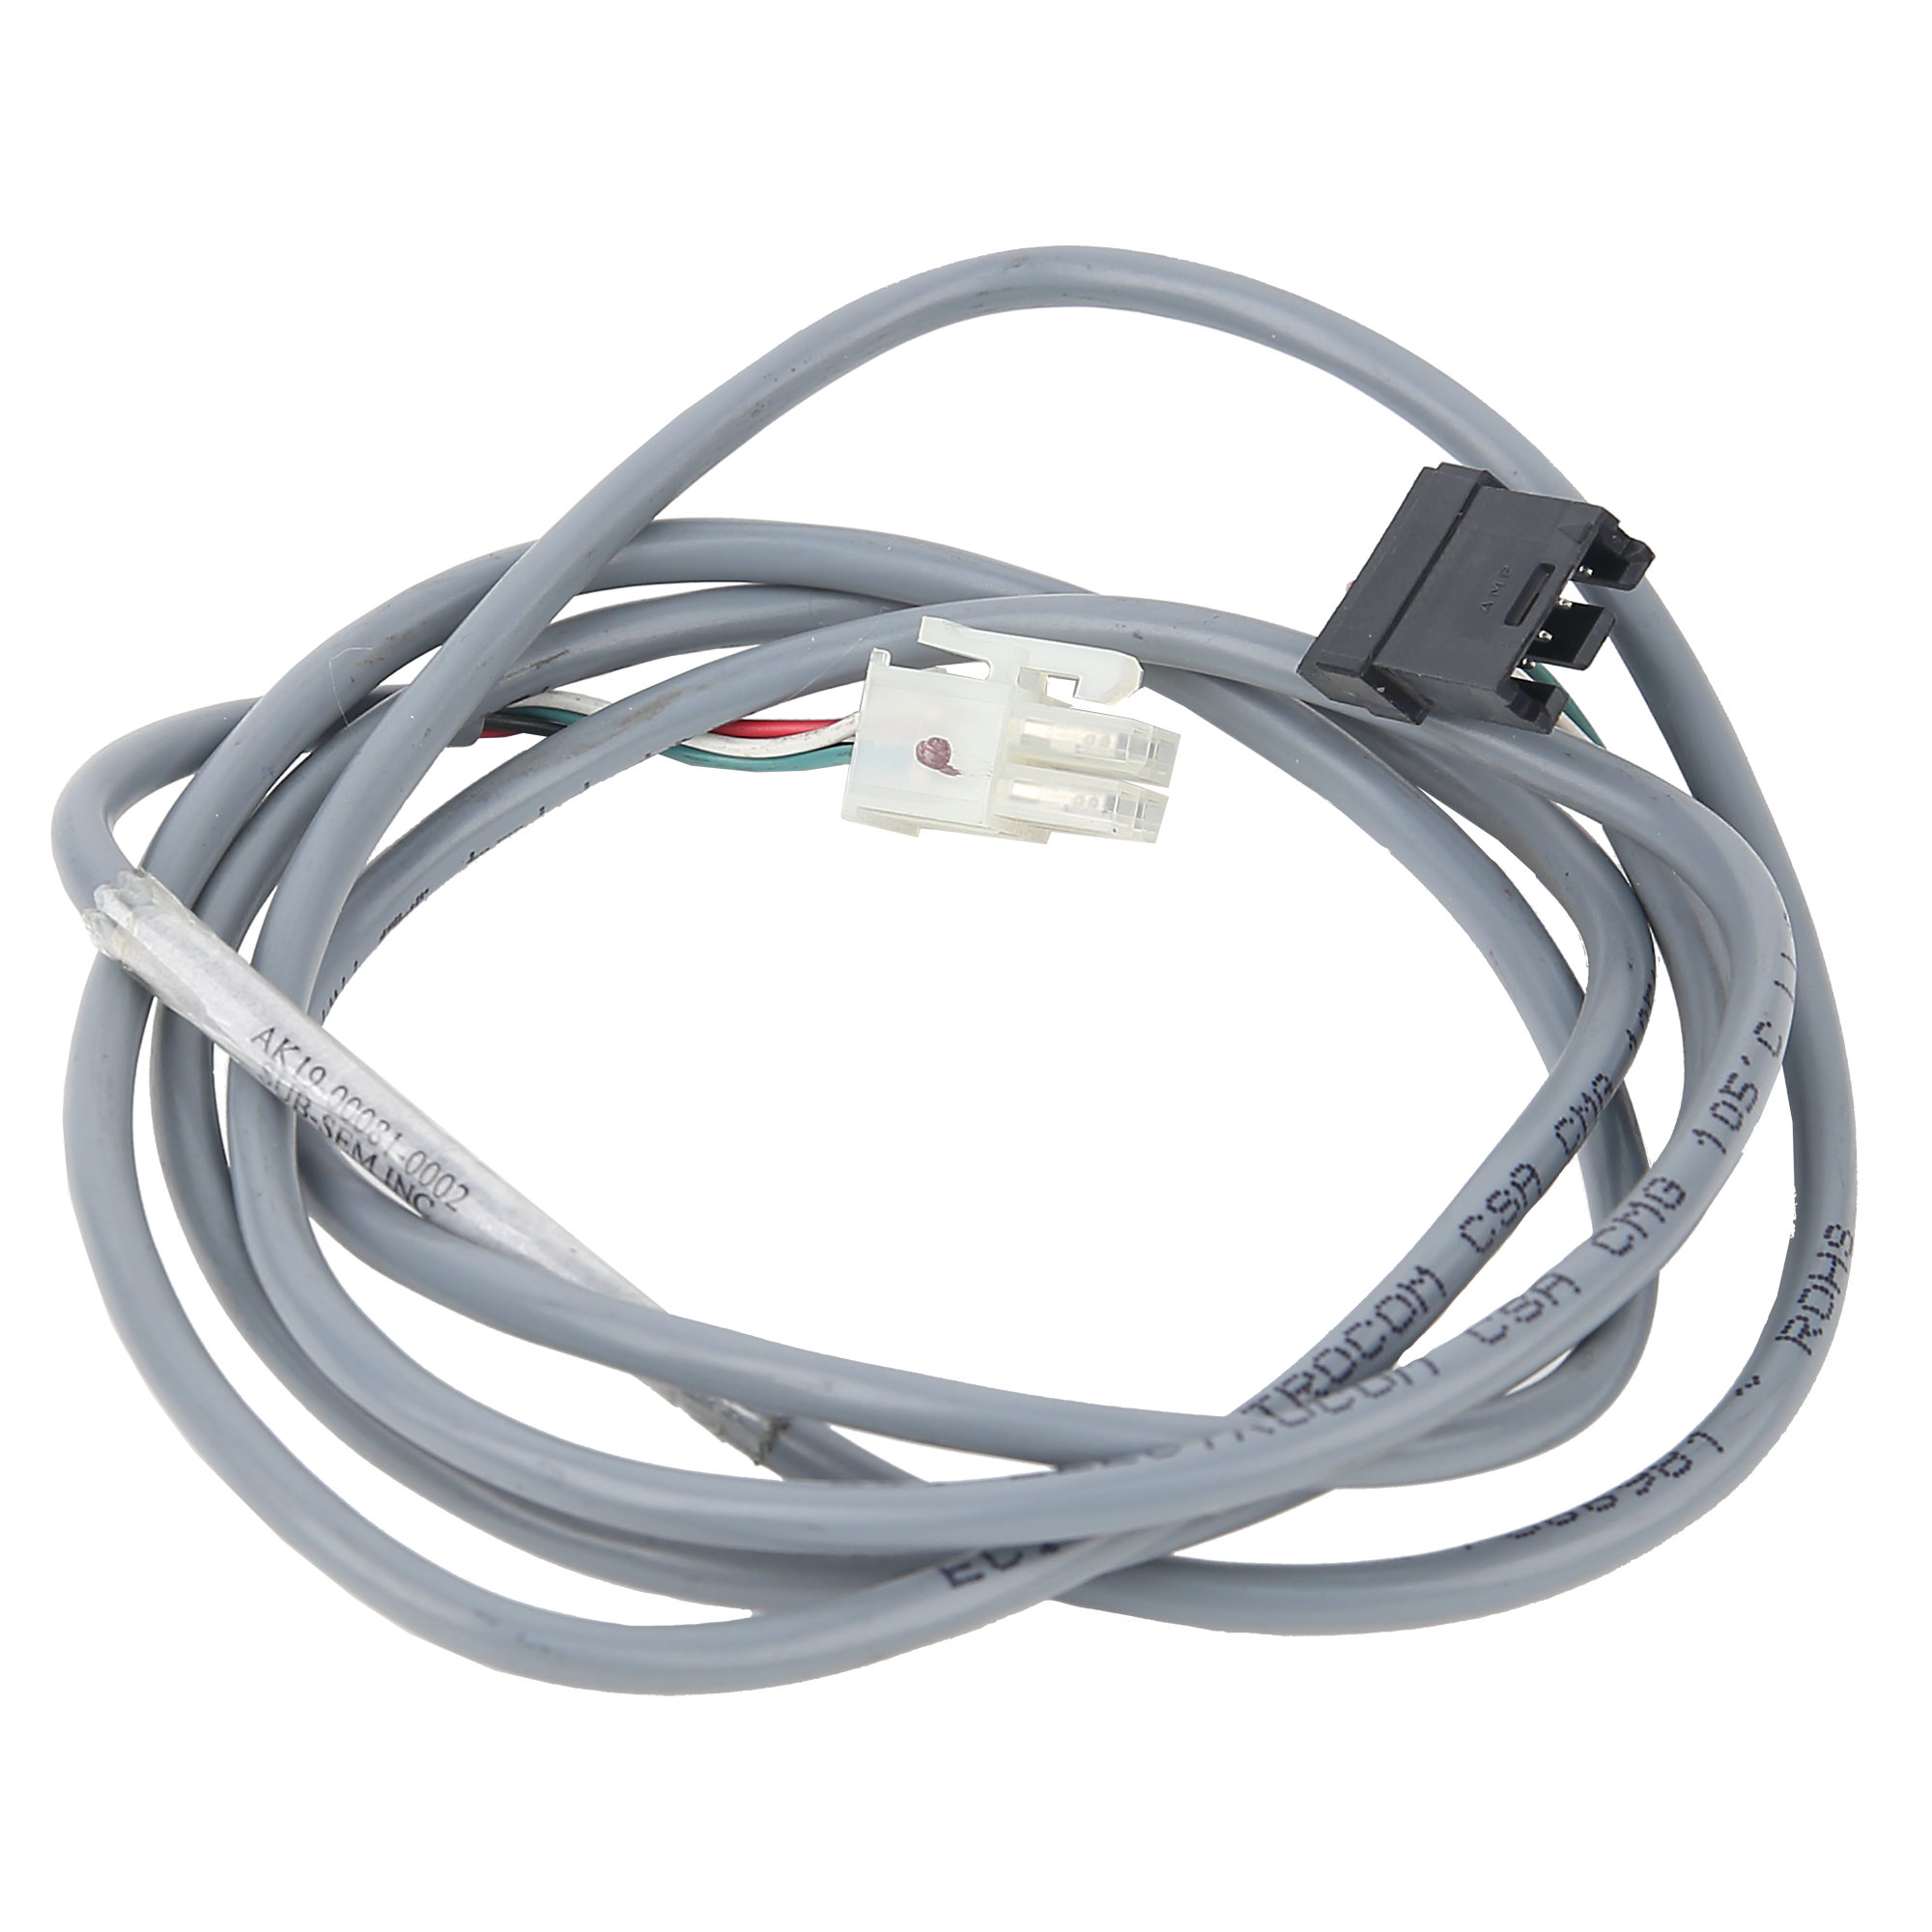 Heart Rate Extension Cable Life Fitness AK19-00081-0002